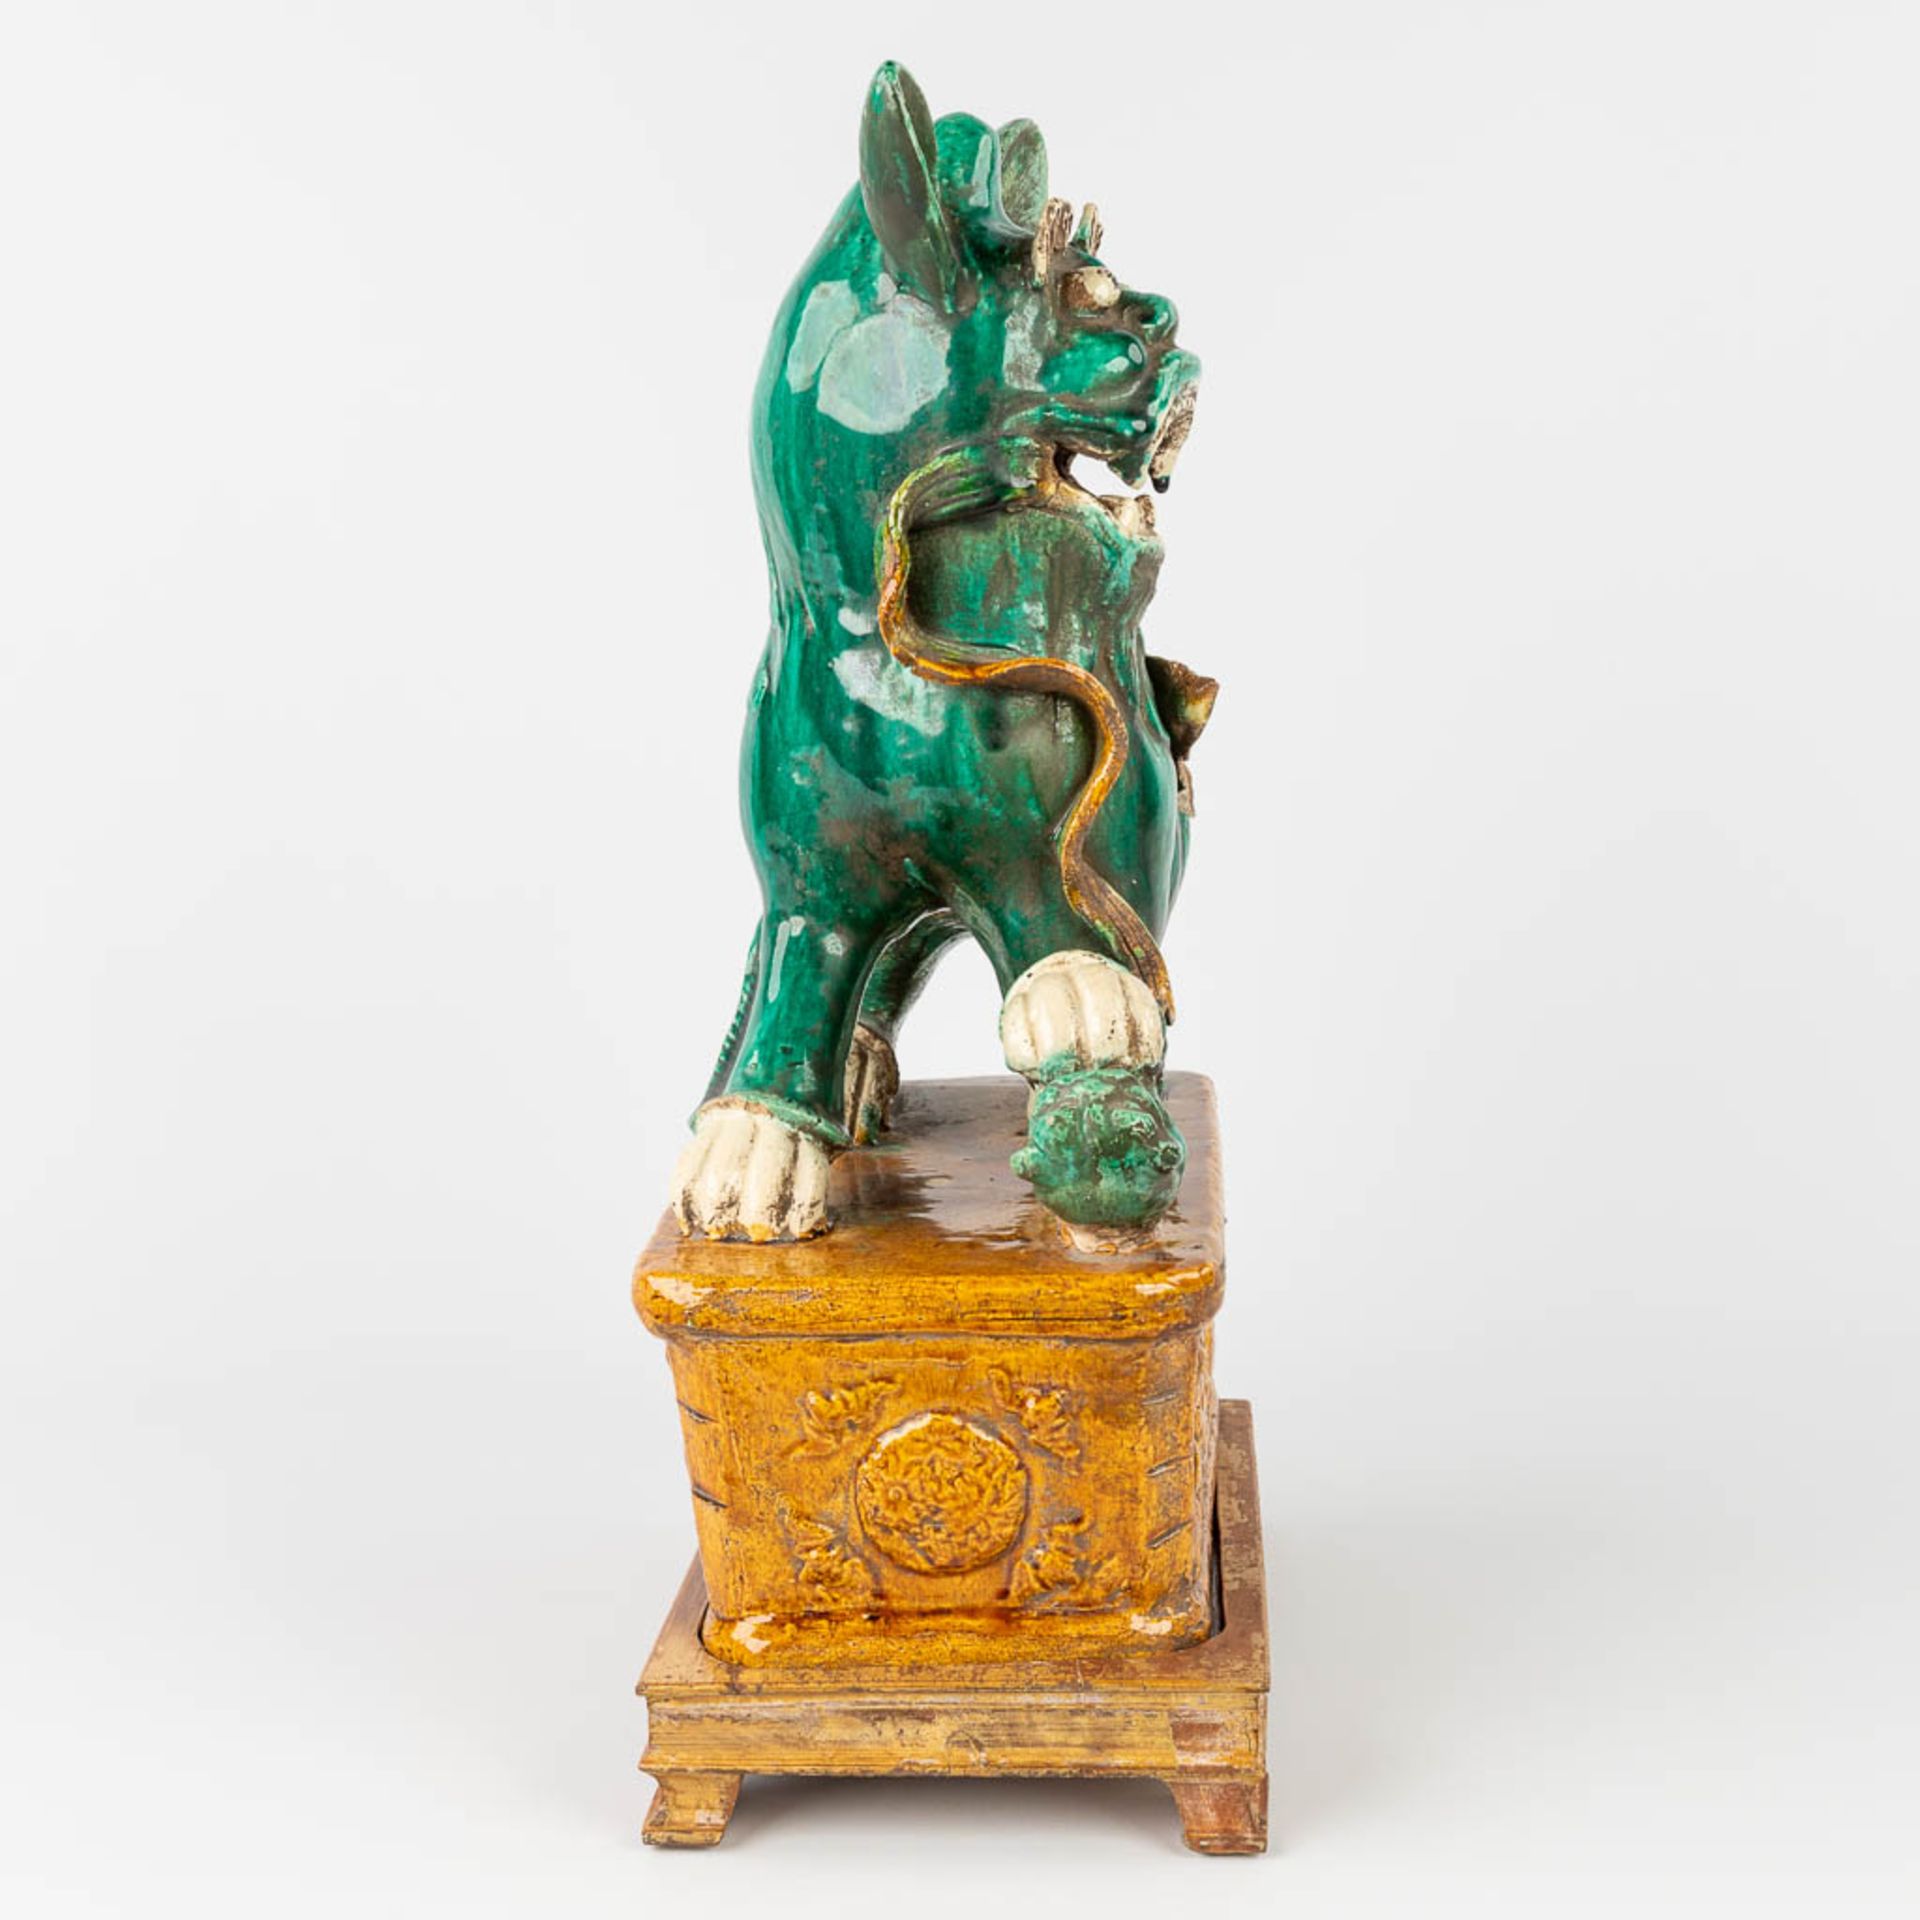 A large foo dog made of glazed stoneware. 20th century. (L:17 x W:38 x H:49 cm) - Image 4 of 15